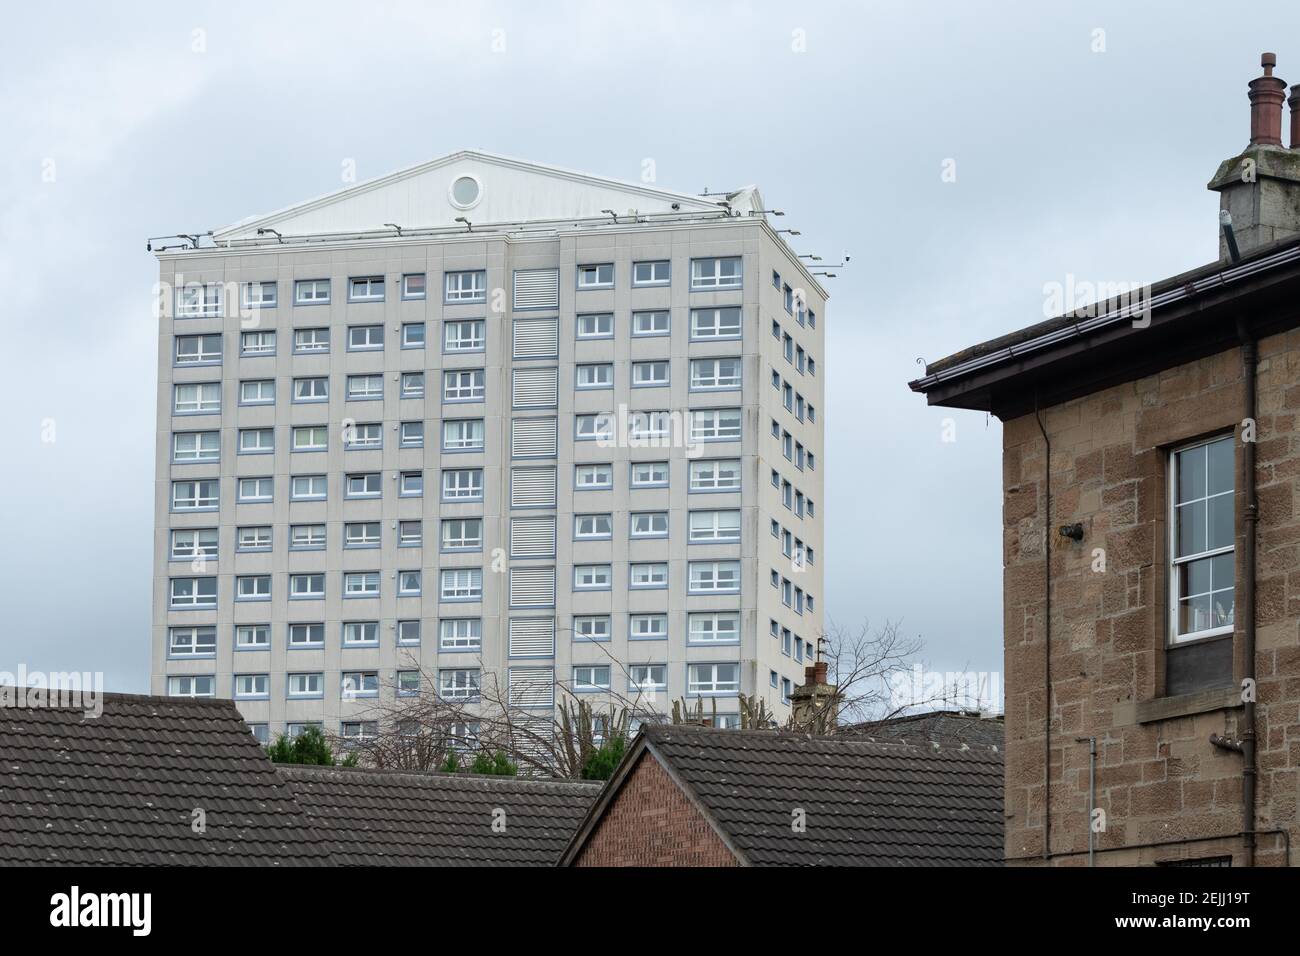 Airdrie high rise flats - Milton Court - Airdrie, North Lanarkshire, Scotland, UK Stock Photo